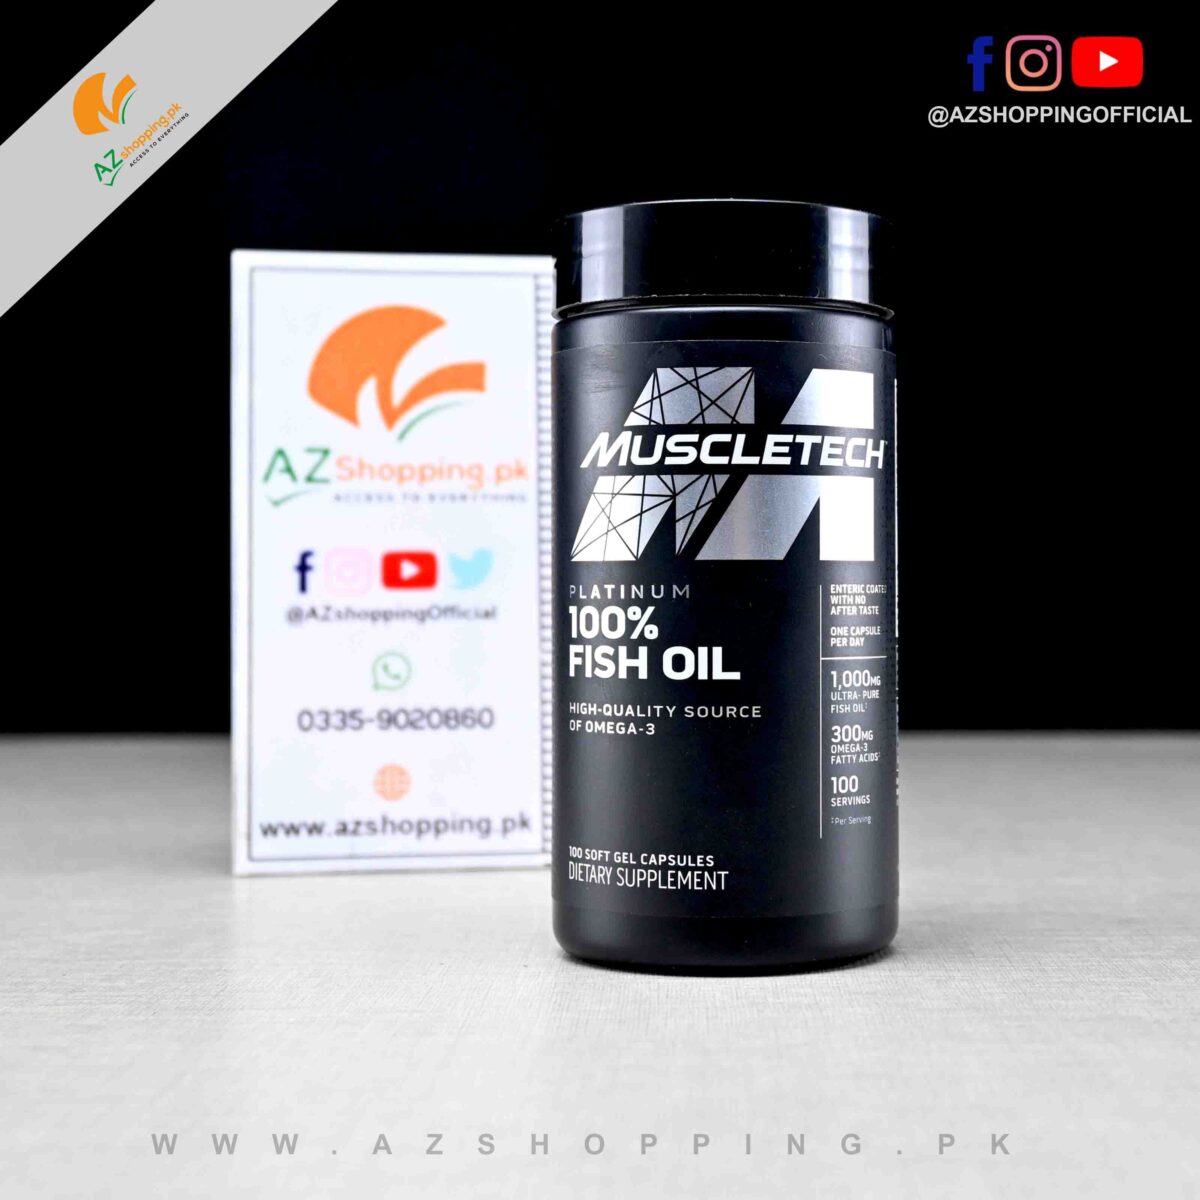 Muscletech – Platinum 100% Fish Oil High-Quality Source of Omega-3 – 100 Soft Gel Capsules